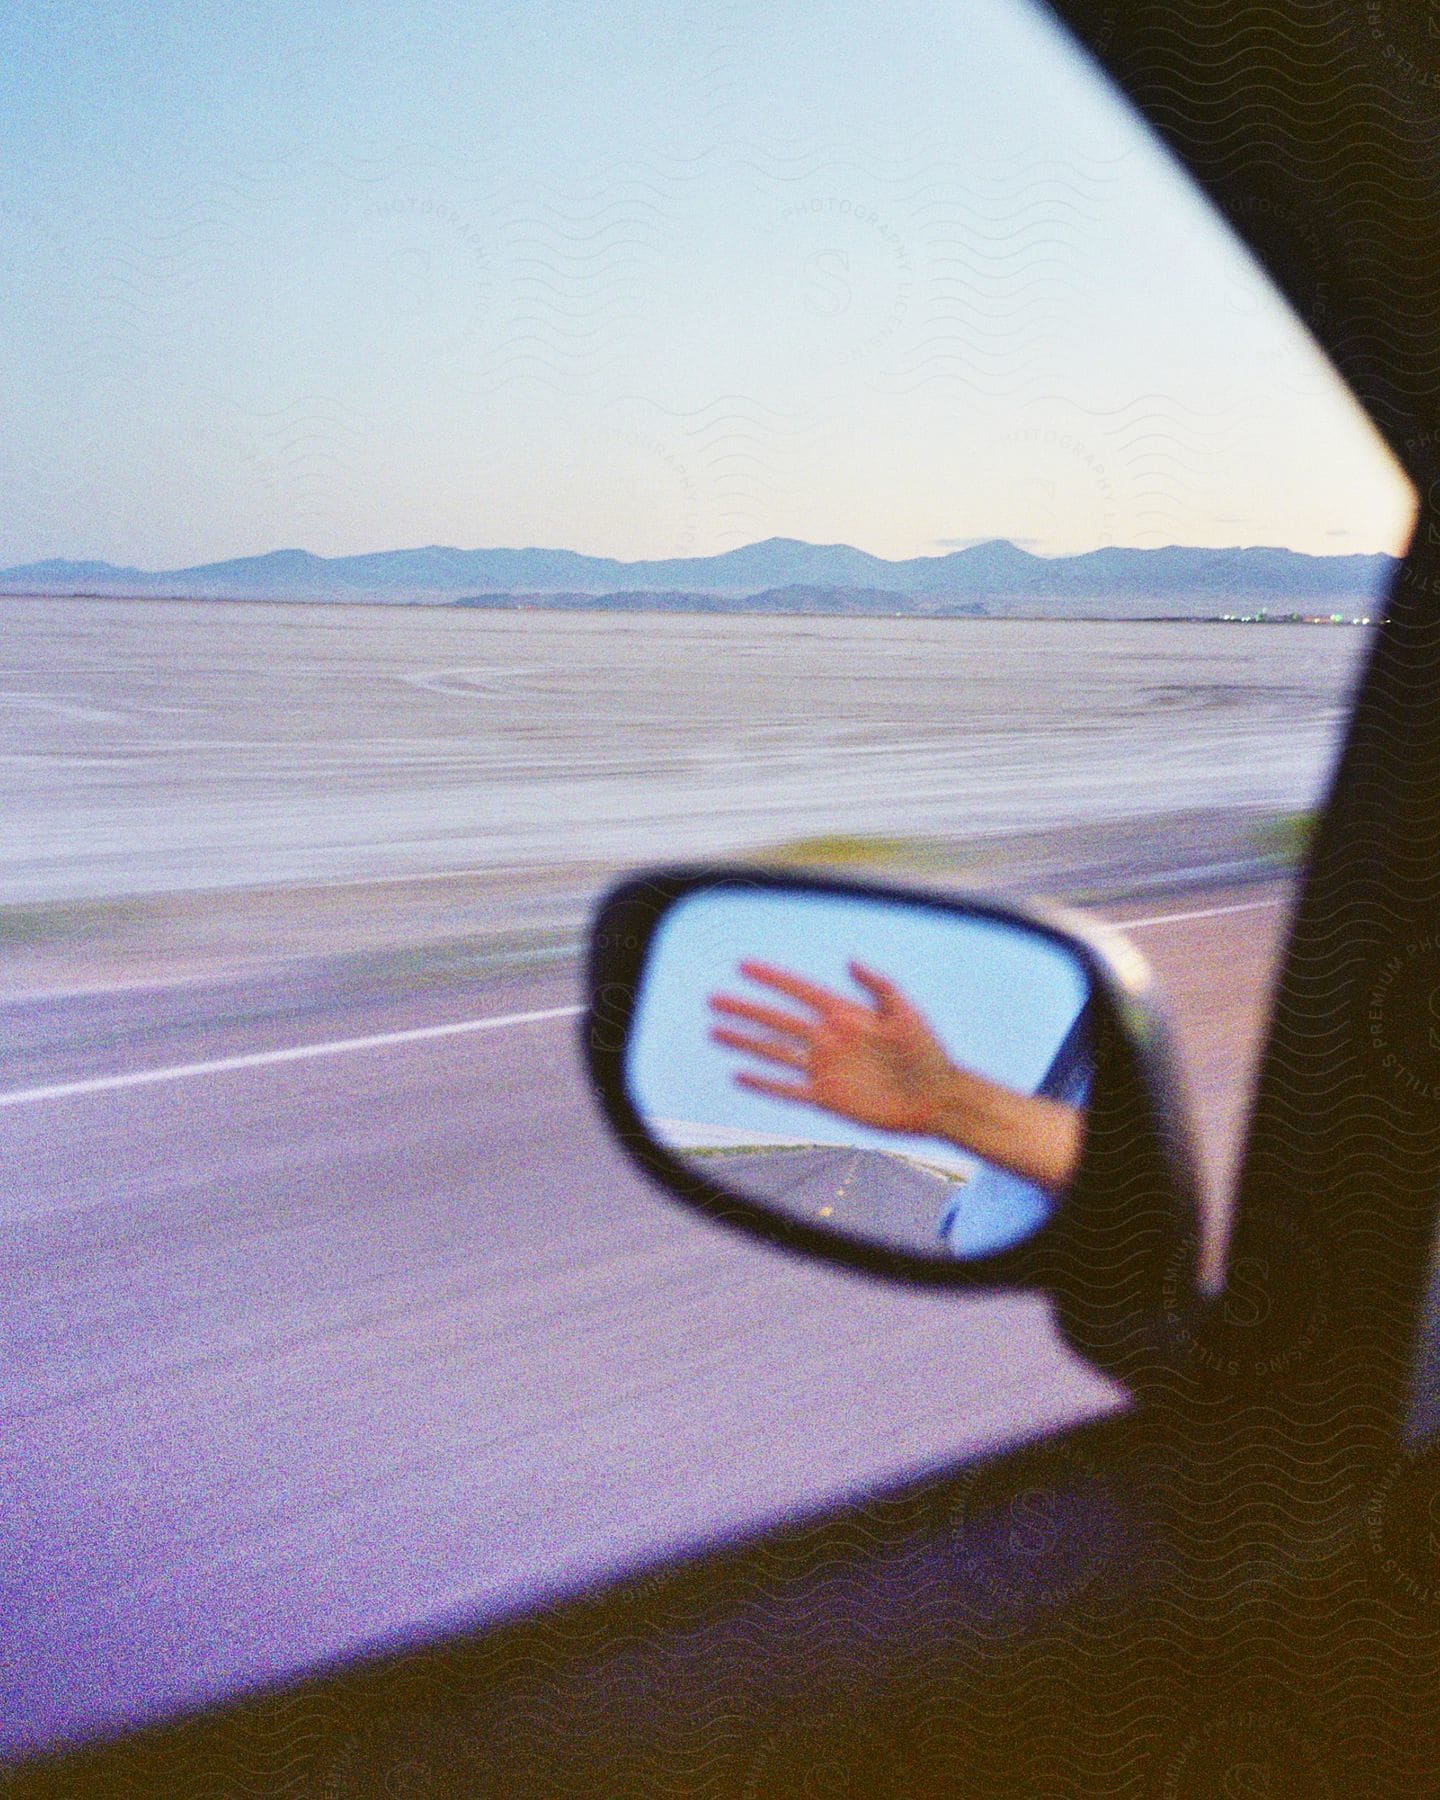 Side mirror reflects hand of person on road trip past sandy plain near mountains.